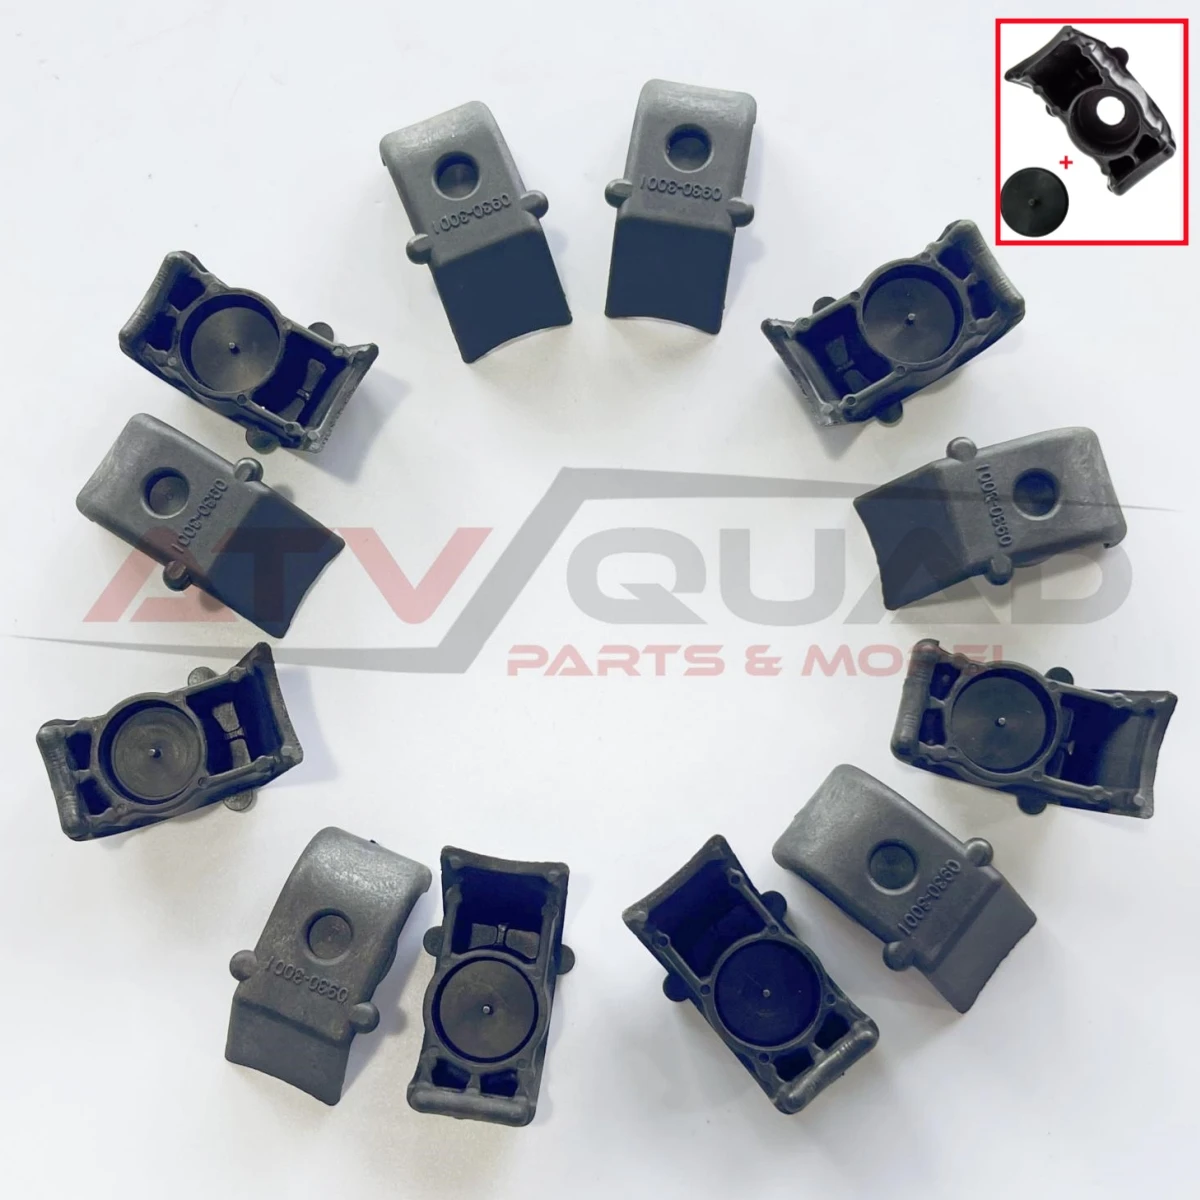 Roller Weight Nylon Protector for CFmoto 400 450 500S 520 X5HO 550 600 Touring 625 800XC 850 X8HO 950 1000 Overland X10 U10 Z10 5pcs starter relay for cfmoto 400 450 500 x5 u5 520 x5ho 550 600 x6 u6 z6 625 touring 800xc 850 1000 overland x10 9cr6 150310